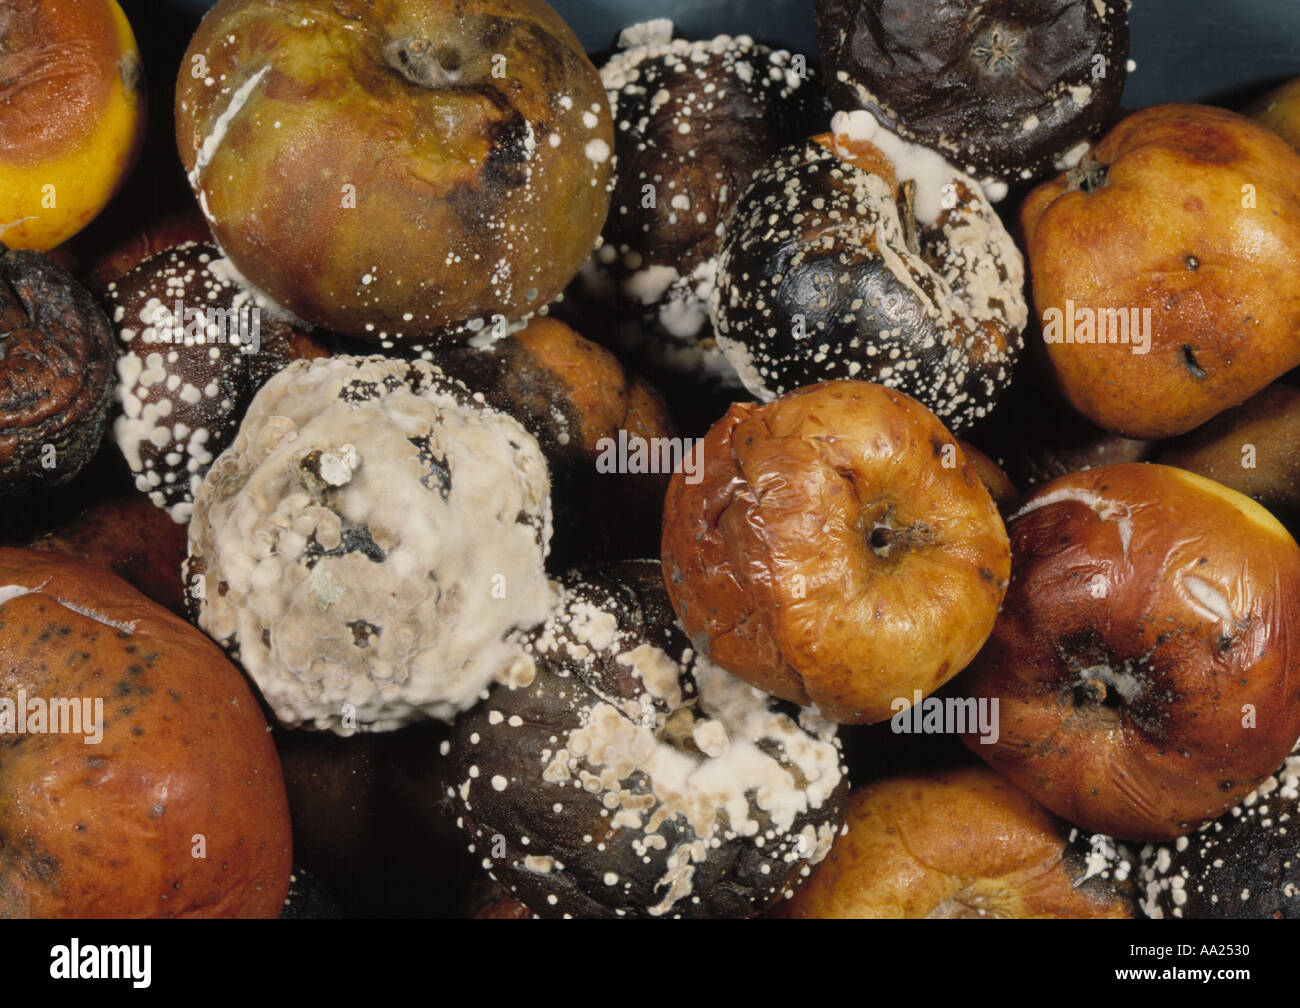 brown rot Sclerotinia fructigena and funghal mould on stored apples Stock Photo